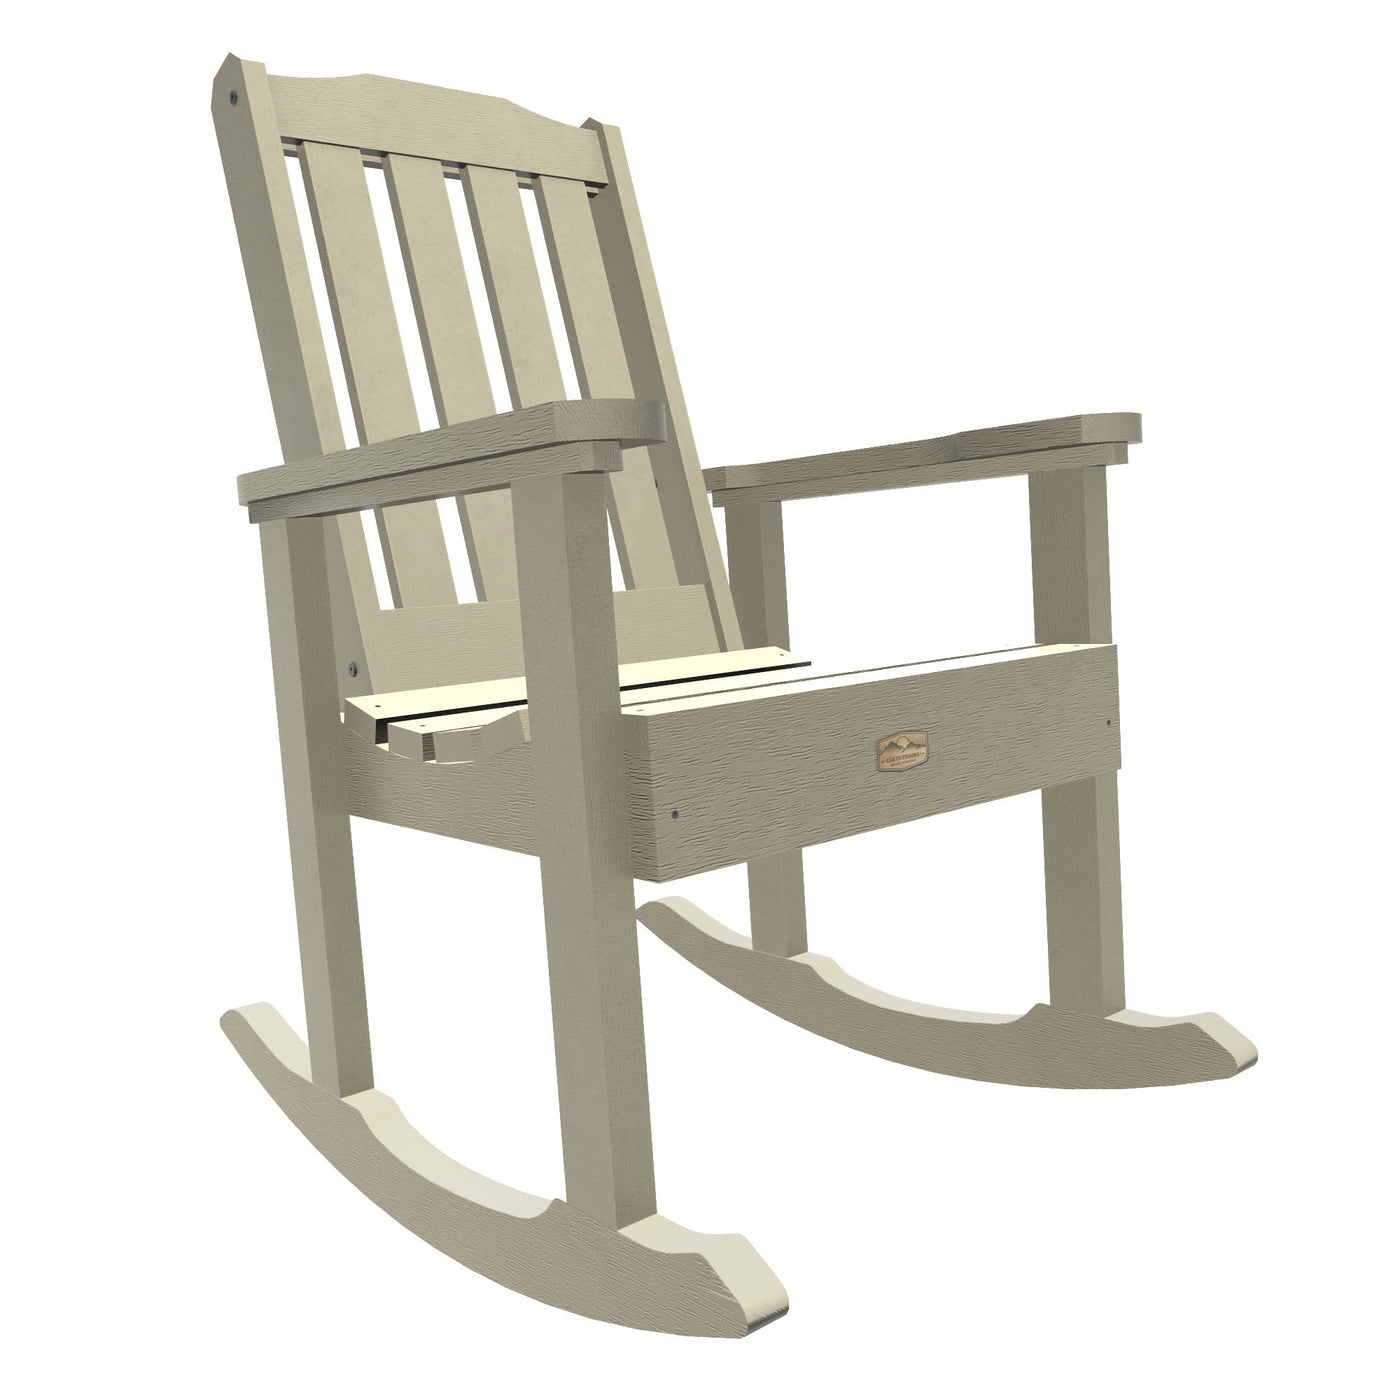 Essential Country Rocking Chair Rockers ELK OUTDOORS® Whitewash 